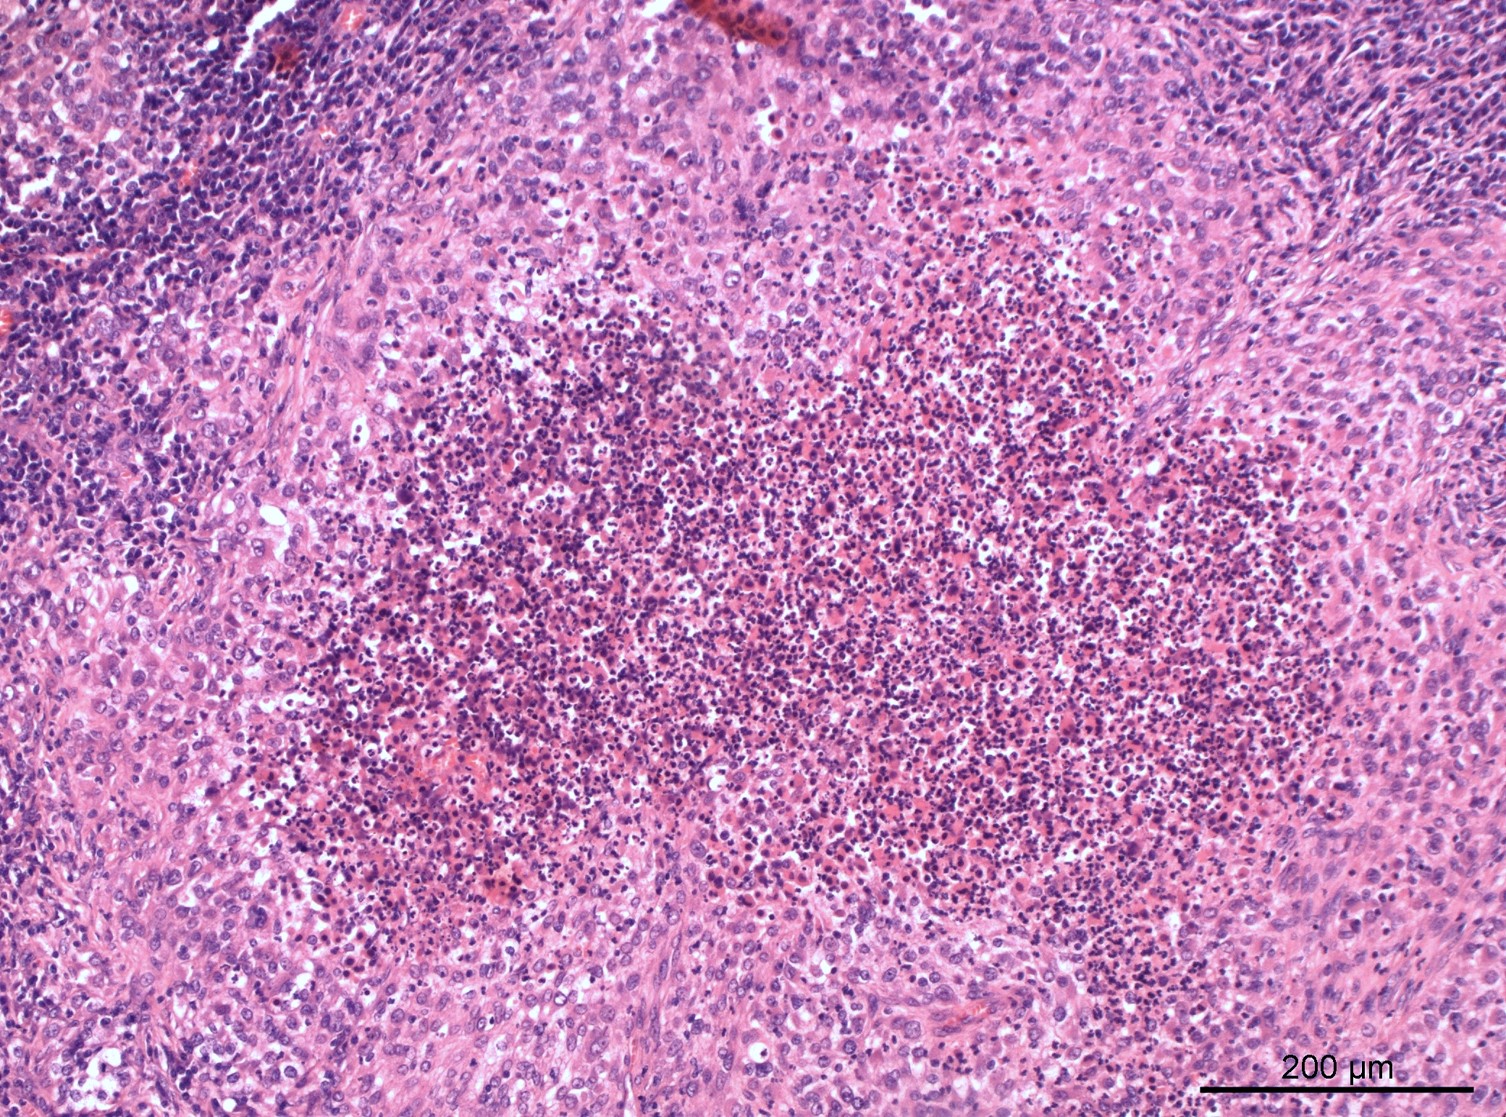 Pathology Outlines - Case of the Month #516